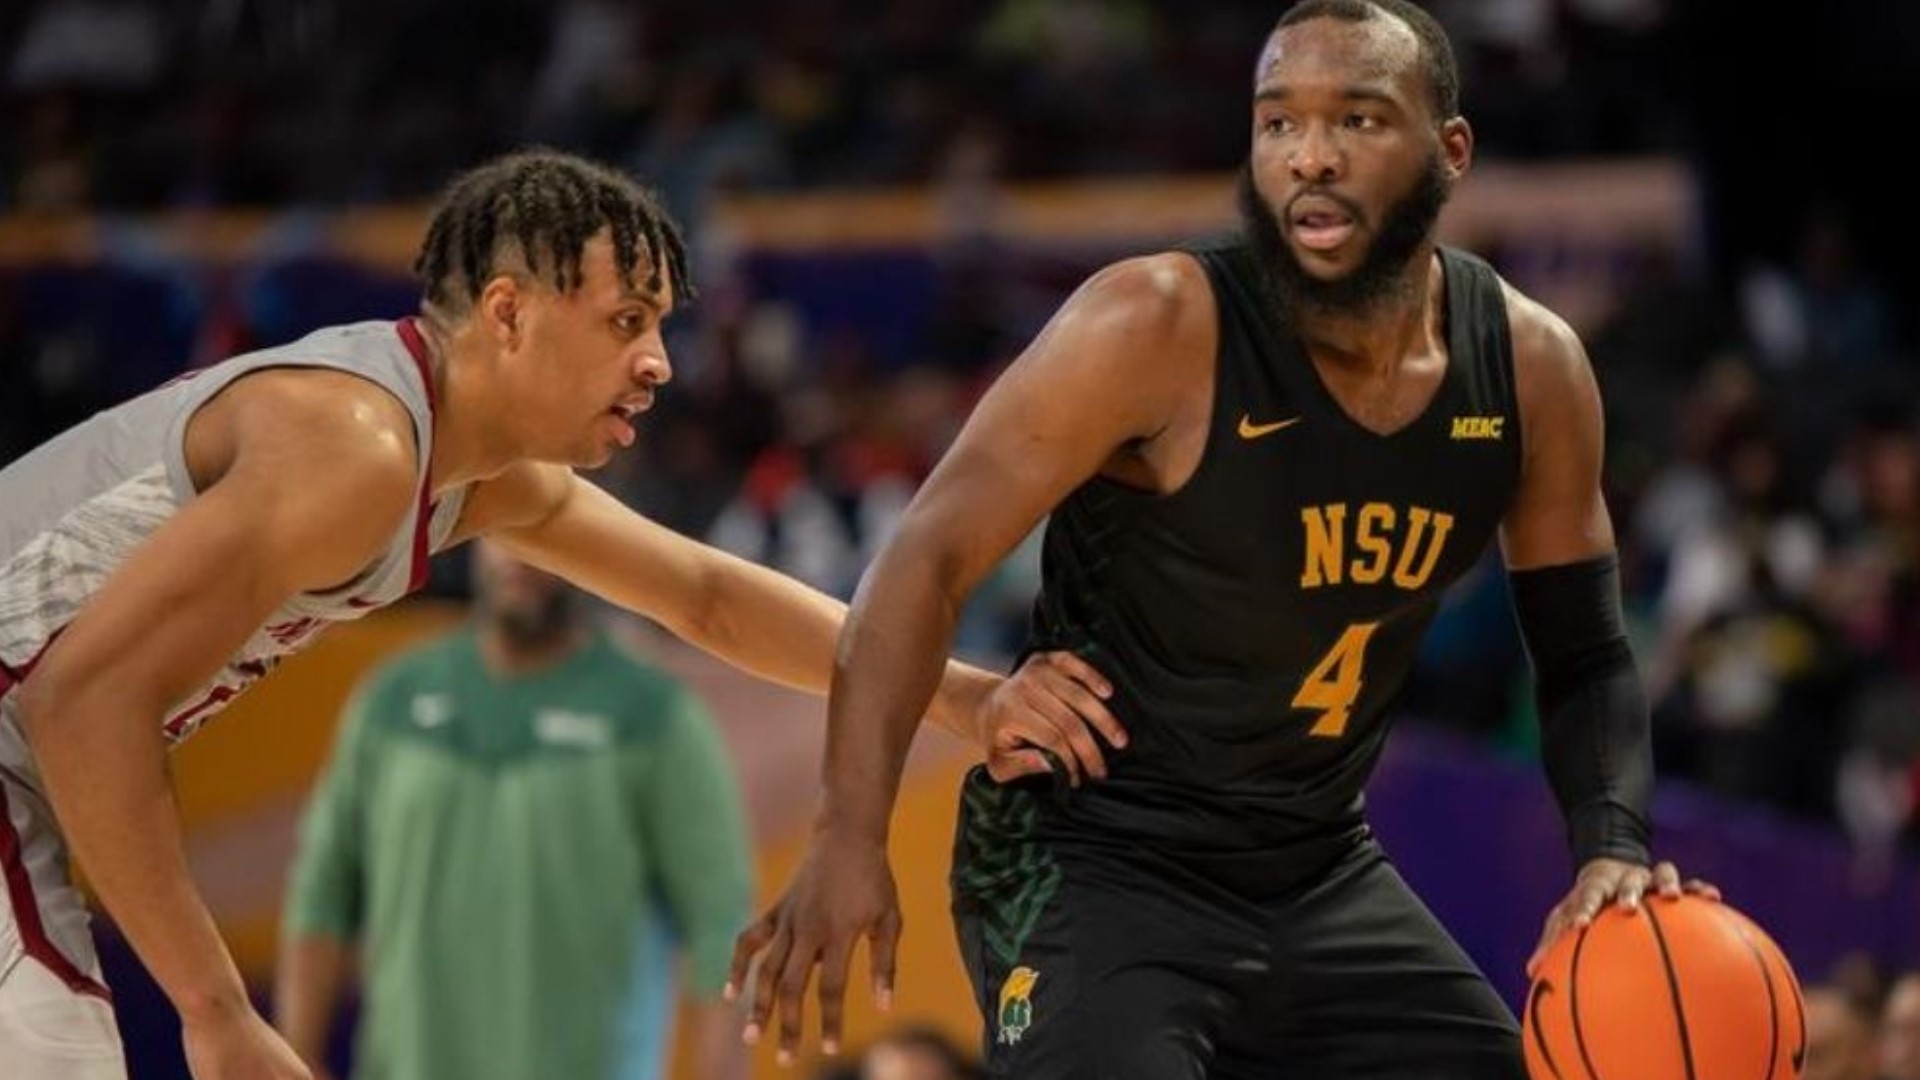 Norfolk State had completed a 13-0 run to regain control of the game.